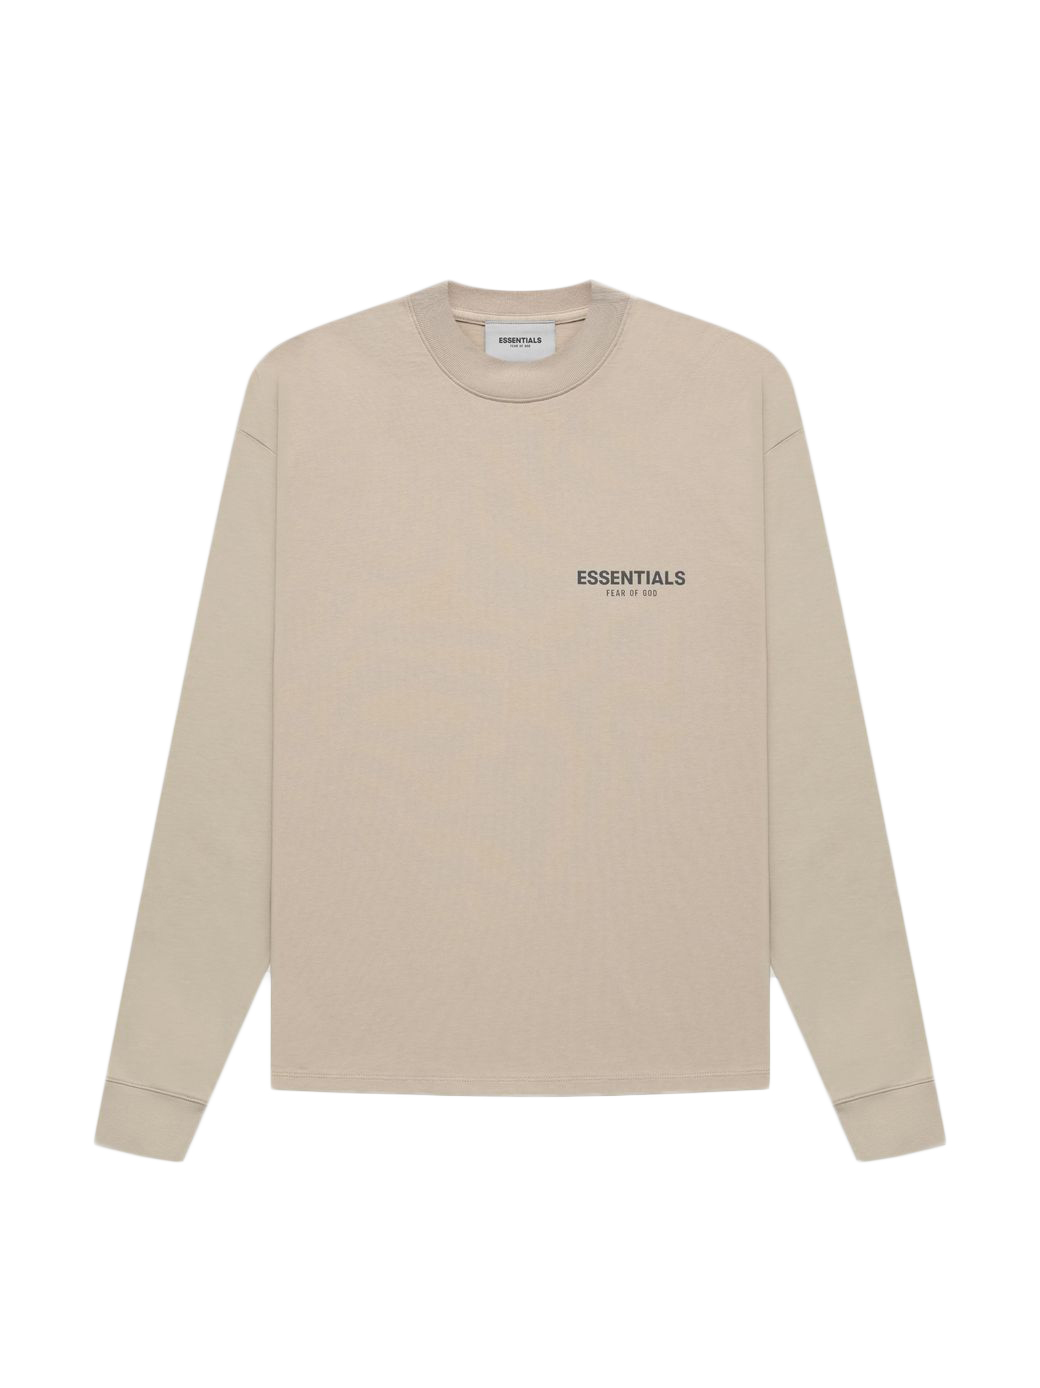 Fear of God Essentials Core Collection L/S T-shirt String Men's